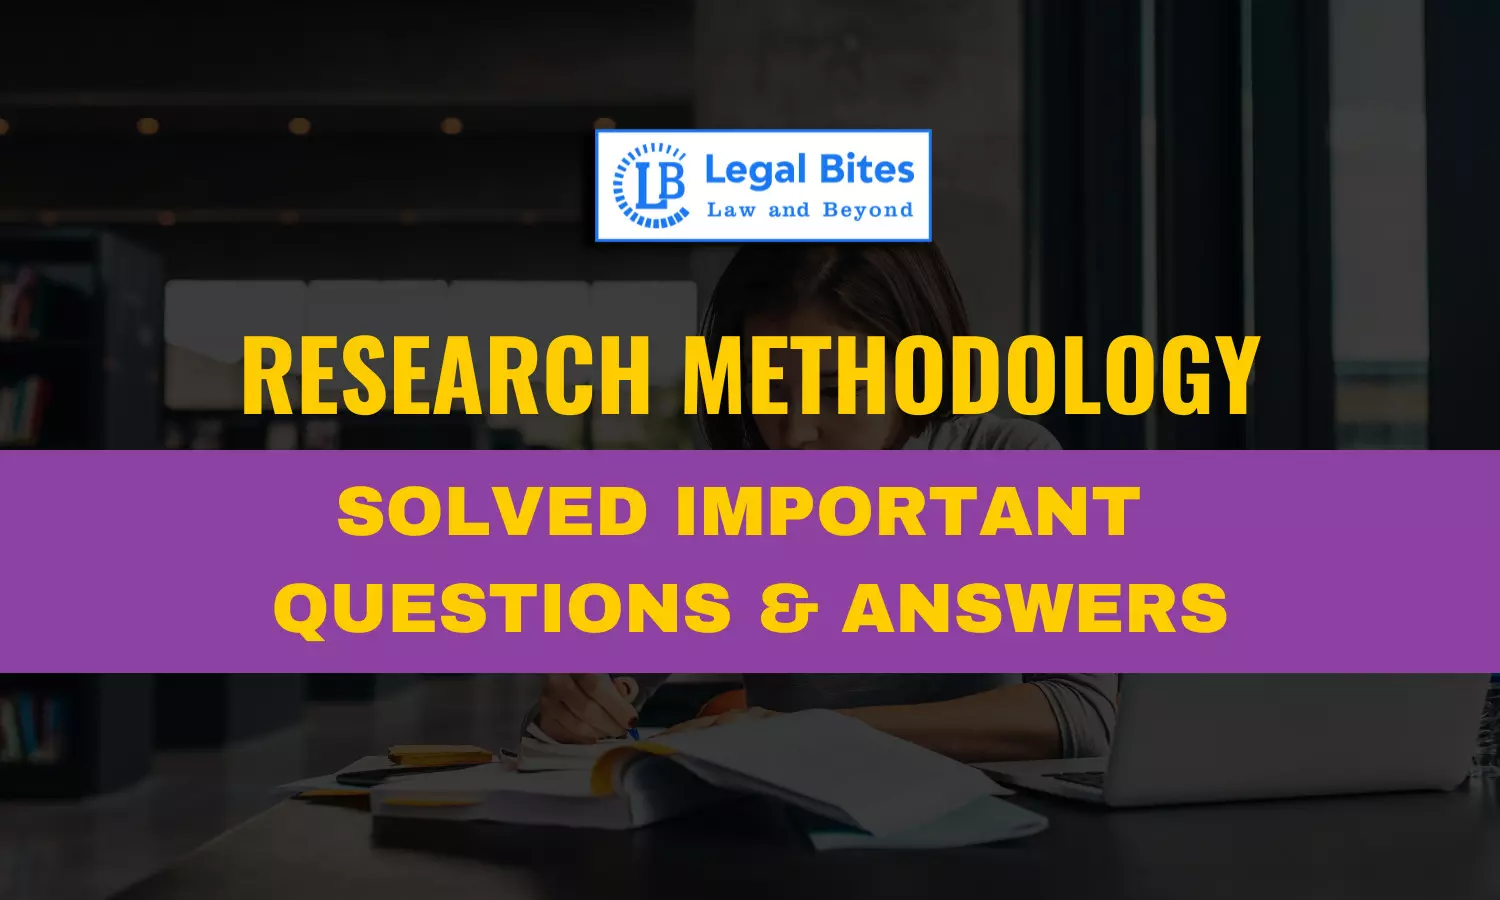 Enumerate the significance of legislation and precedents in legal research. What is a research problem? How do you identify a good research problem? Explain.